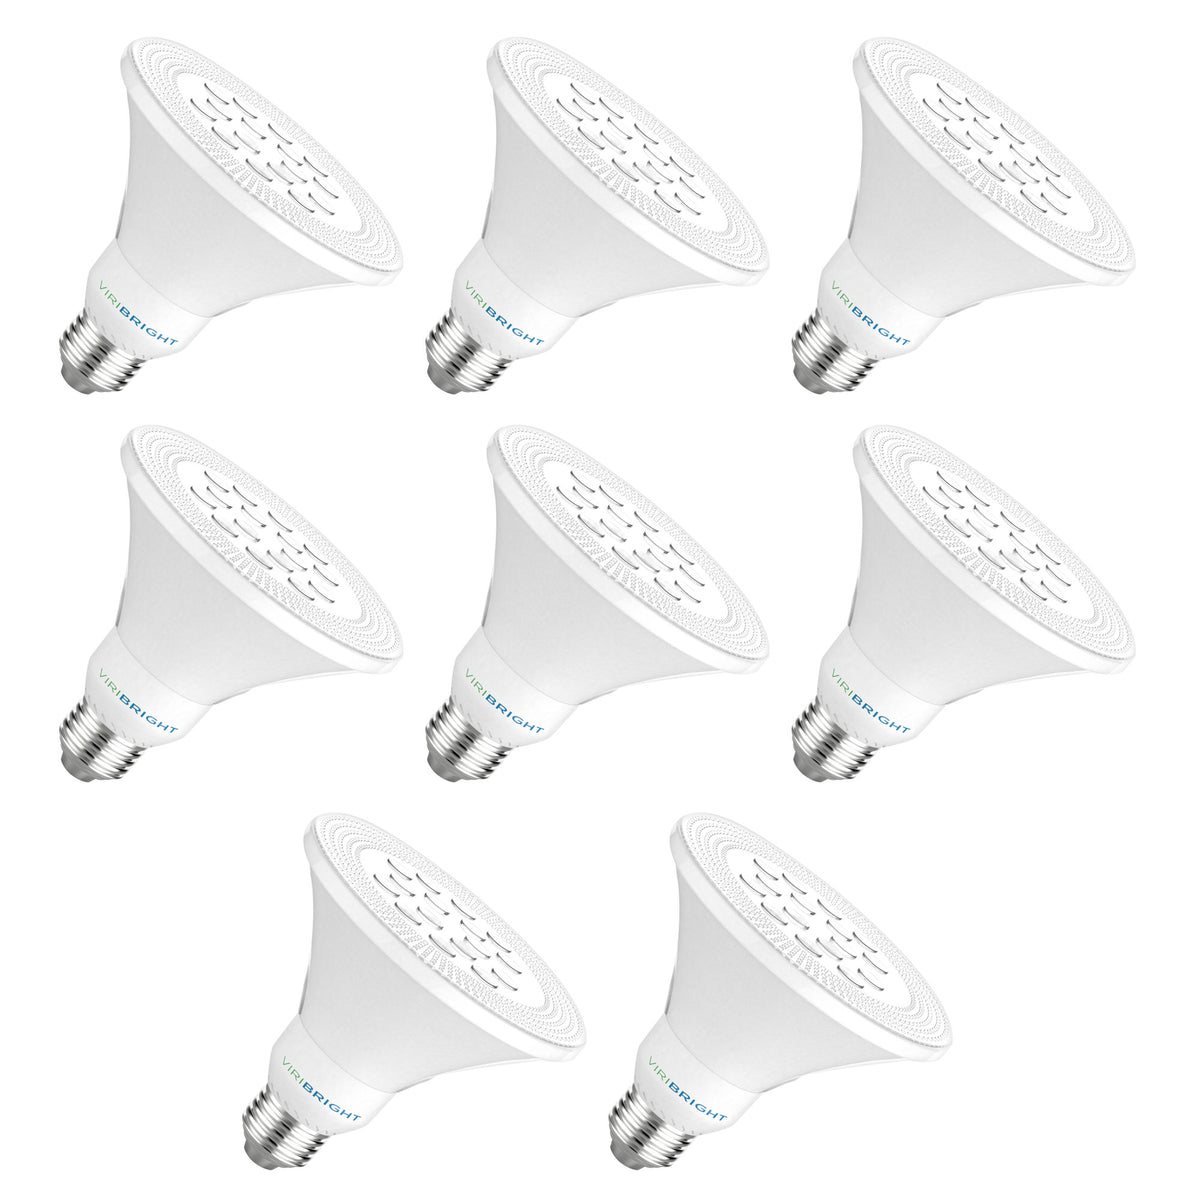 Picture of Viribright 754609-HD8 800 Lumens 75W Equivalent PAR30 Dimmable Short Neck Indoor Daylight LED Flood Light Bulb - Pack of 8